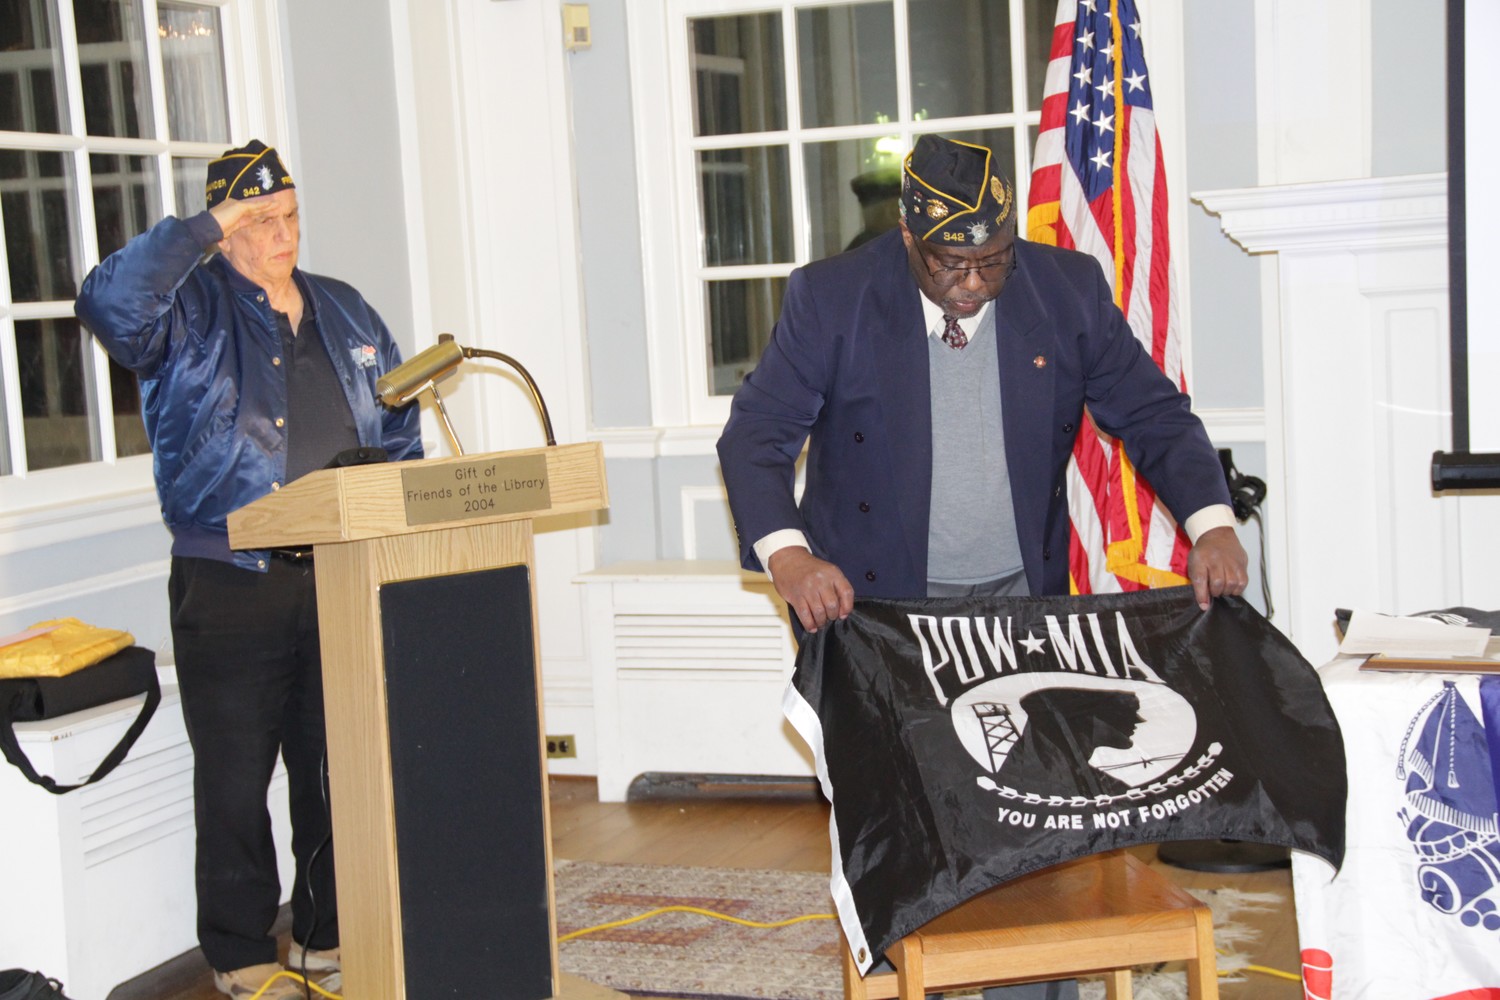 To honor prisoners of war and comrades missing in action, 1st Vice Cmdr. David Cockerel placed a POW-MIA flag on an empty chair during the Pearl Harbor Observance and Memorial Ceremony at the Freeport Memorial Library on Dec. 7.